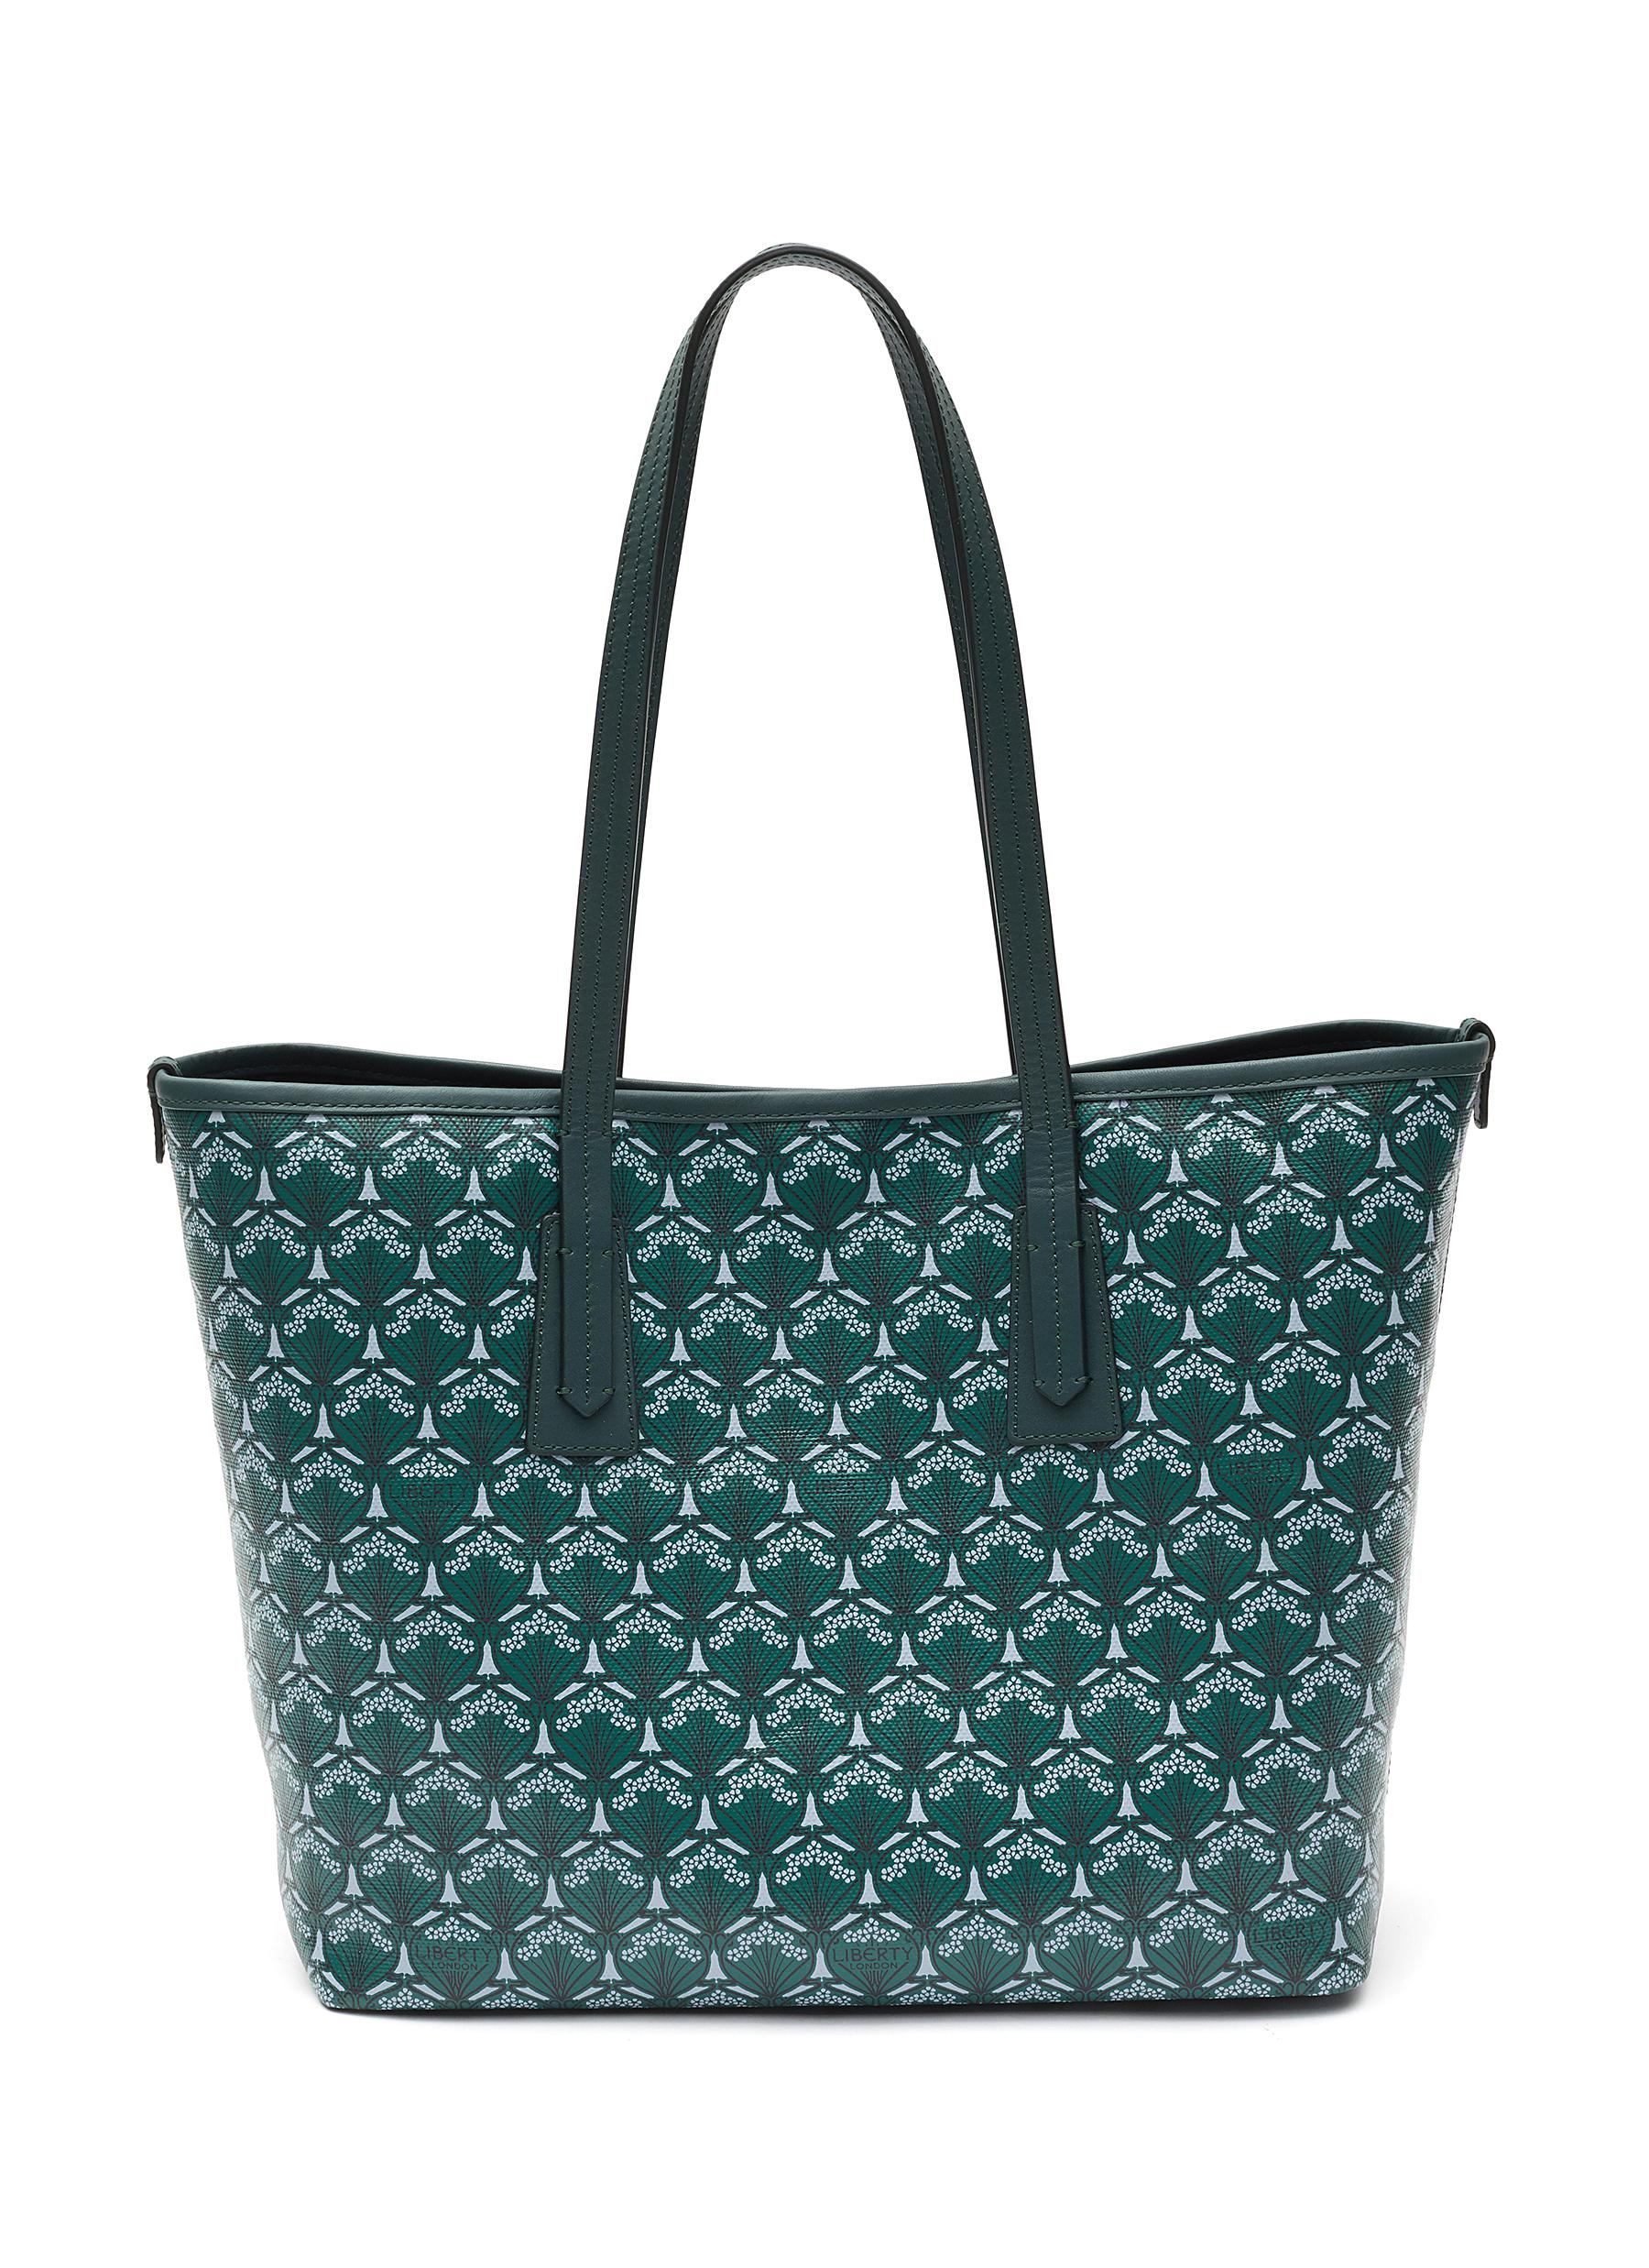 Liberty London 'iphis Little Marlborough' Printed Canvas Tote Bag In Green